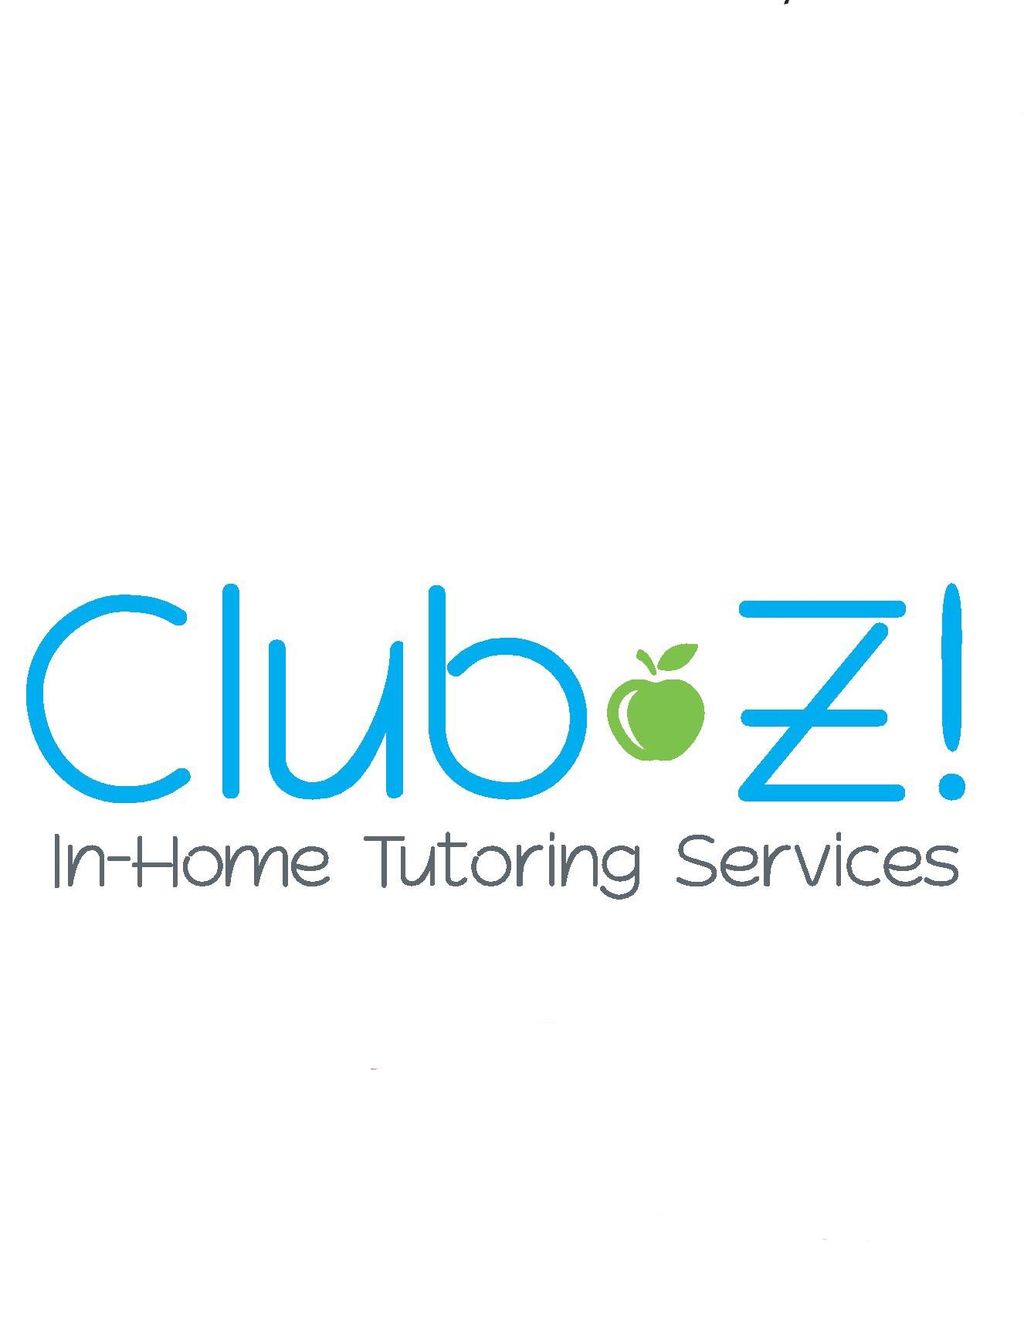 ClubZ! In-Home-Tutoring Services